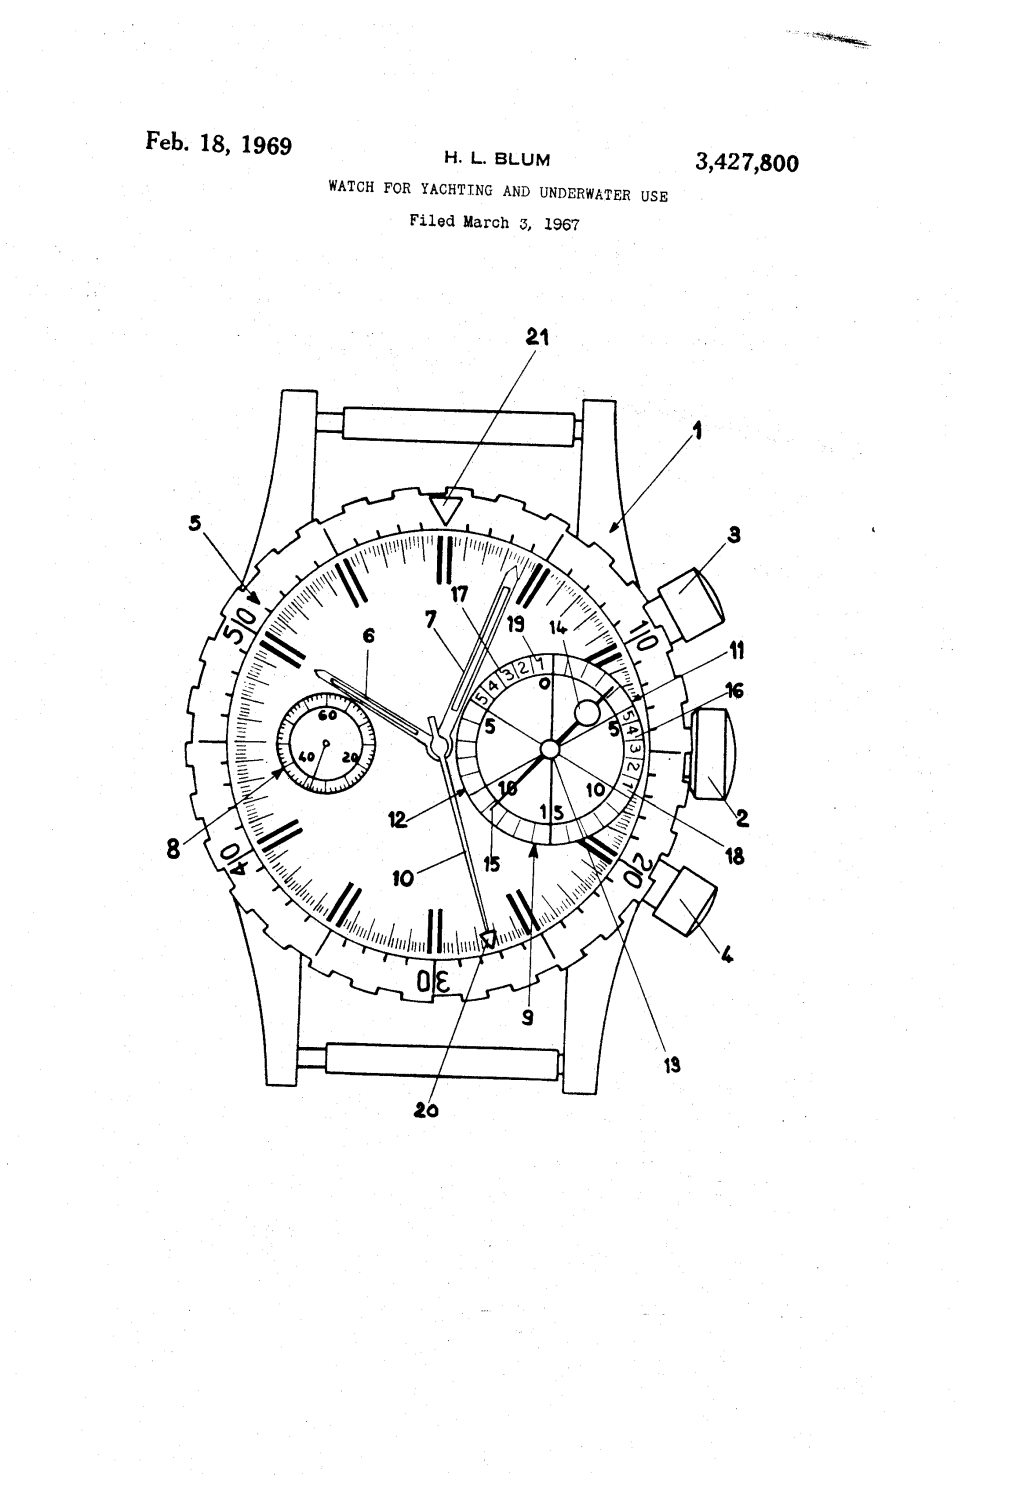 Feb. 18, 1969 H. L. BLUM 3,427,800 WATCH for YACHTING and UNDERWATER USE Filed March 3, 1967